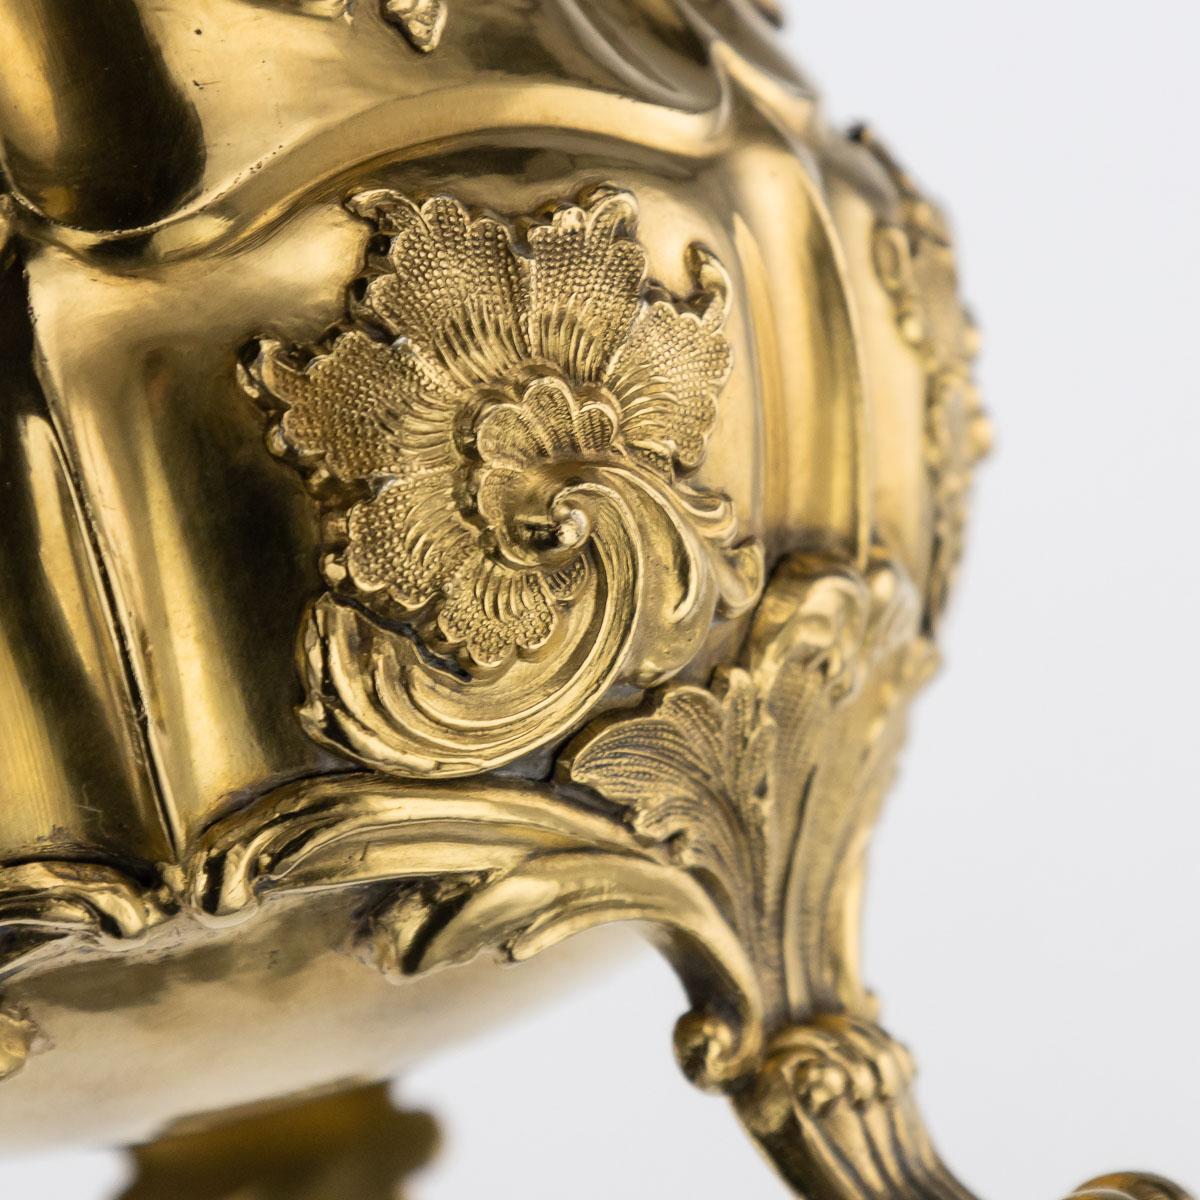 19th Century Russian Solid Silver-Gilt Cup and Cover, St-Petersburg, circa 1842 9